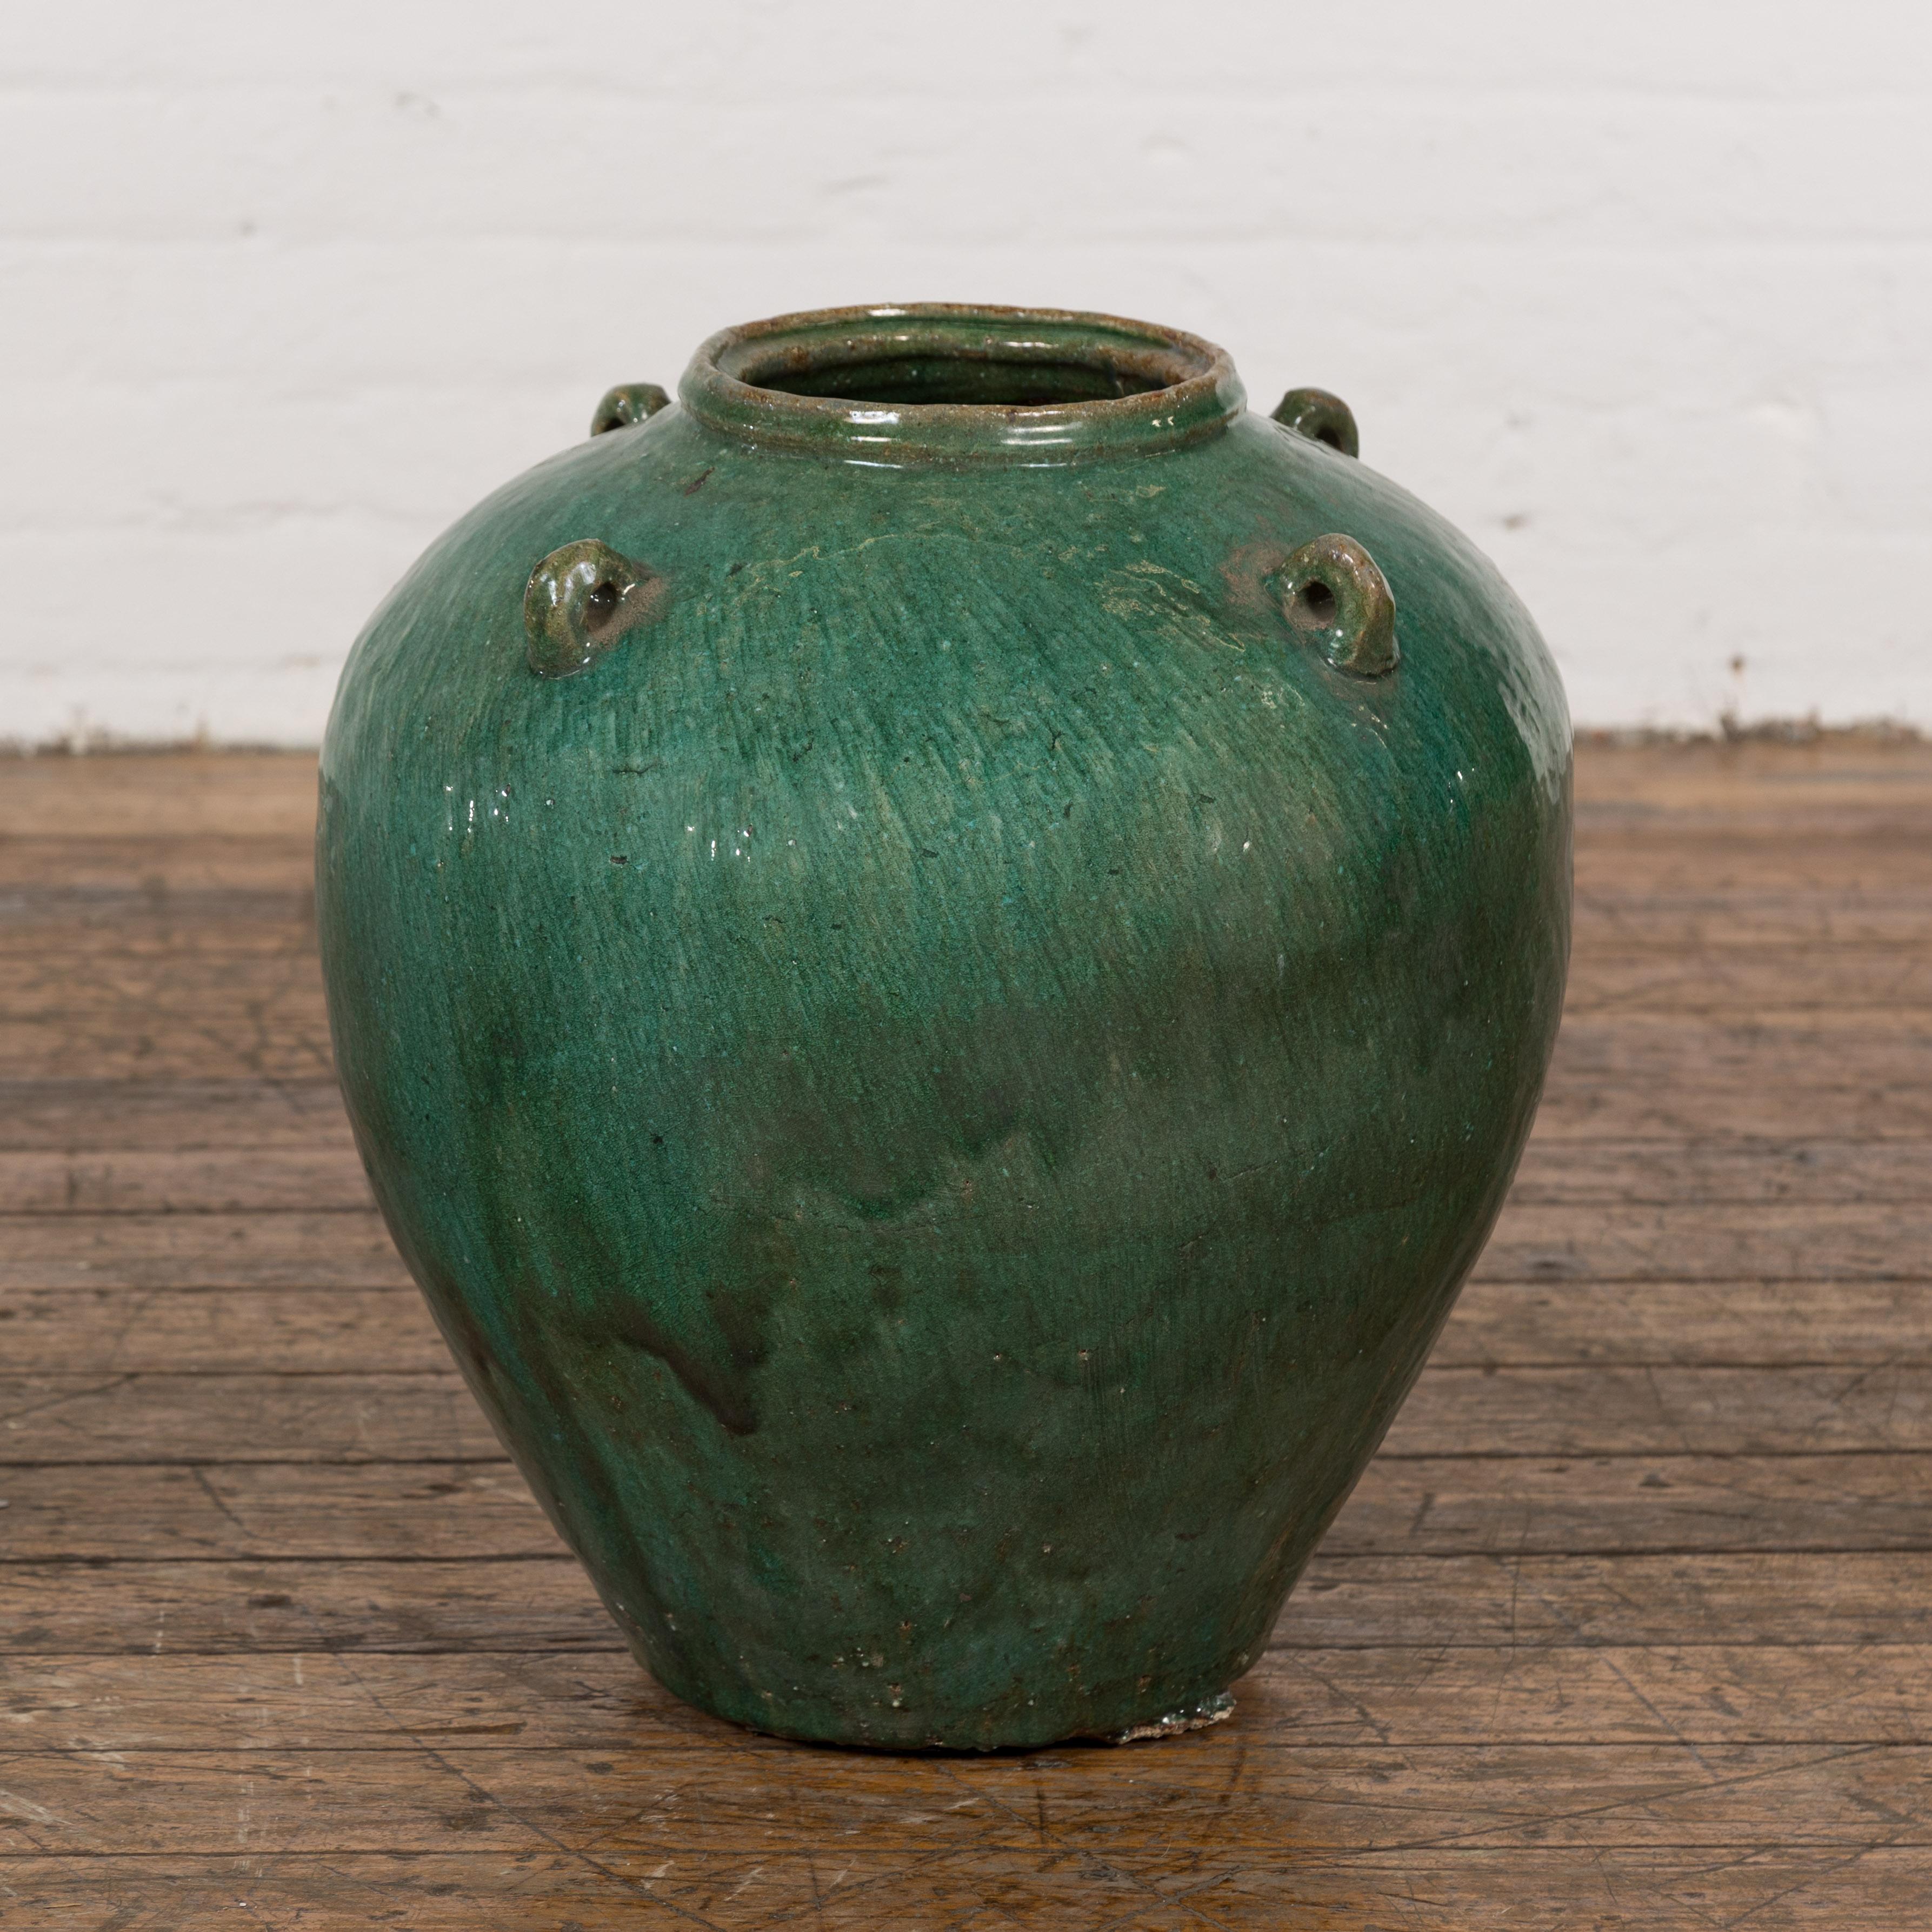 A Chinese antique late Qing Dynasty period green glaze Hunan jar from the early 20th century with petite swan neck loop handles, subtle wave effects and tapering lines. This late Qing Dynasty period Hunan jar, originating from the early 20th